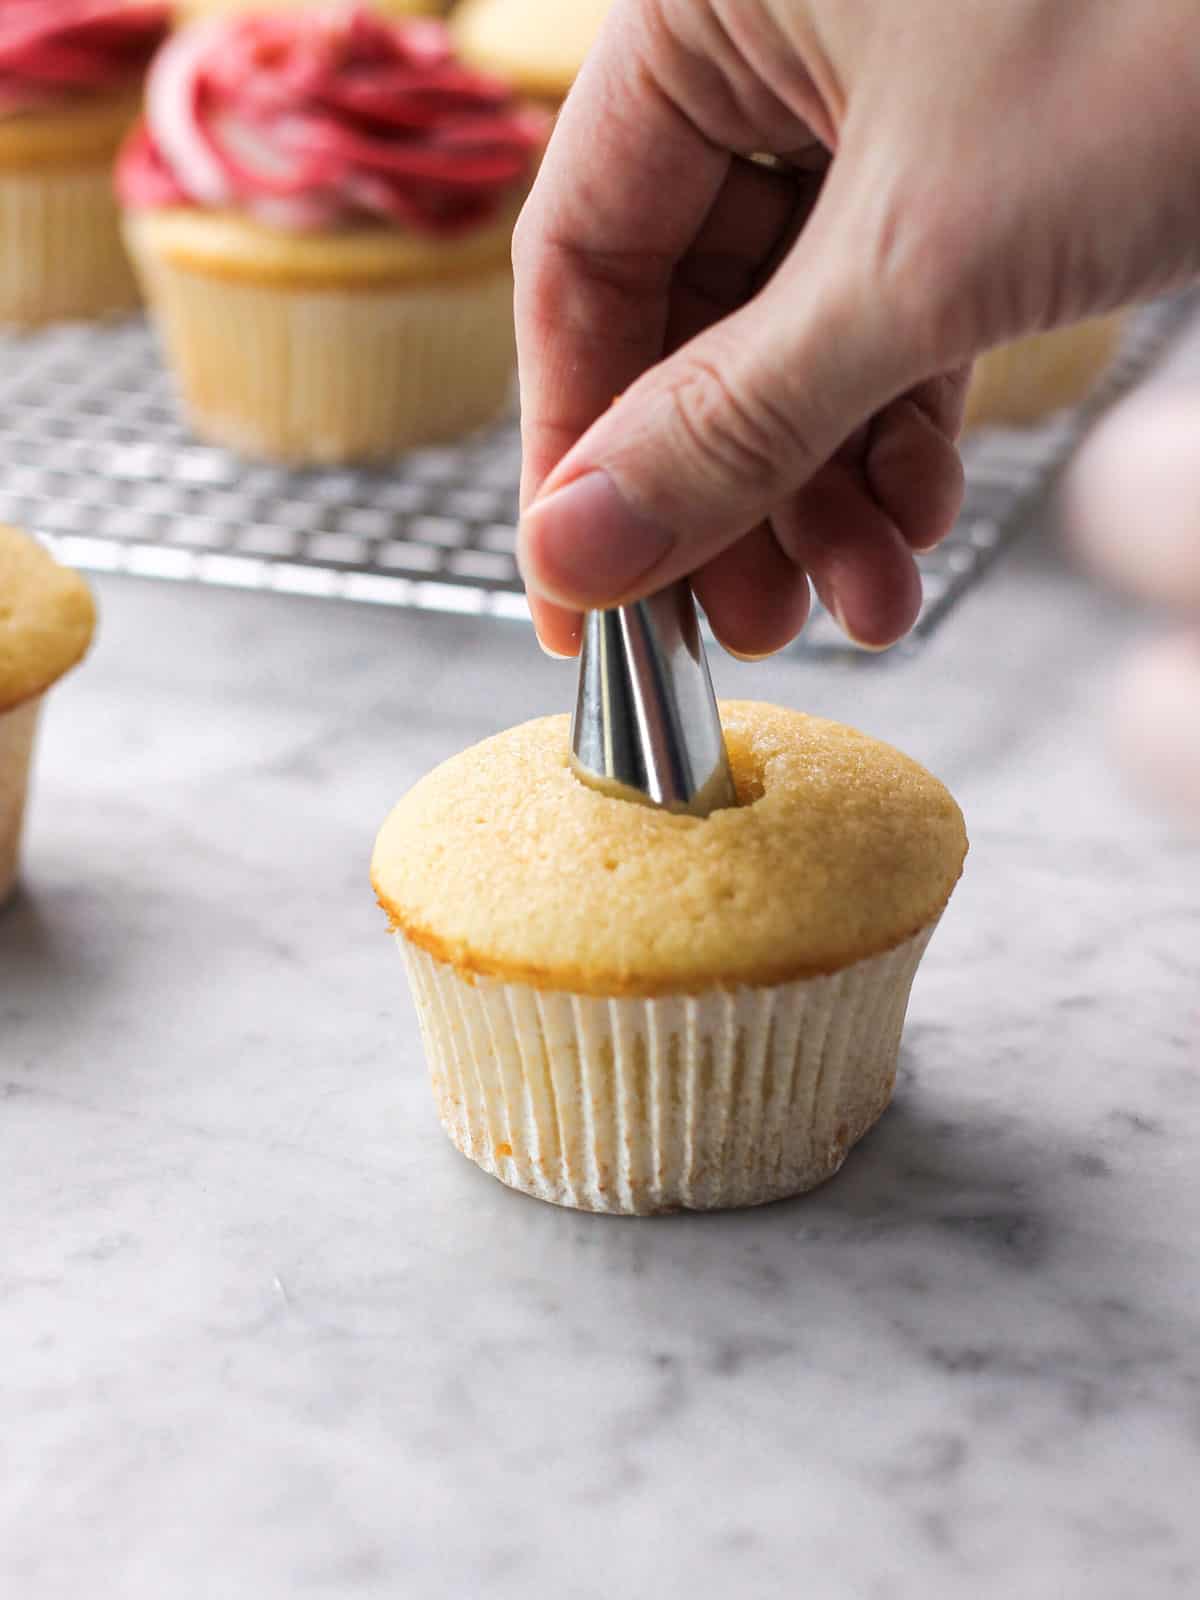 image of removing the center of a cupcake with a piping tip so filling can be added.